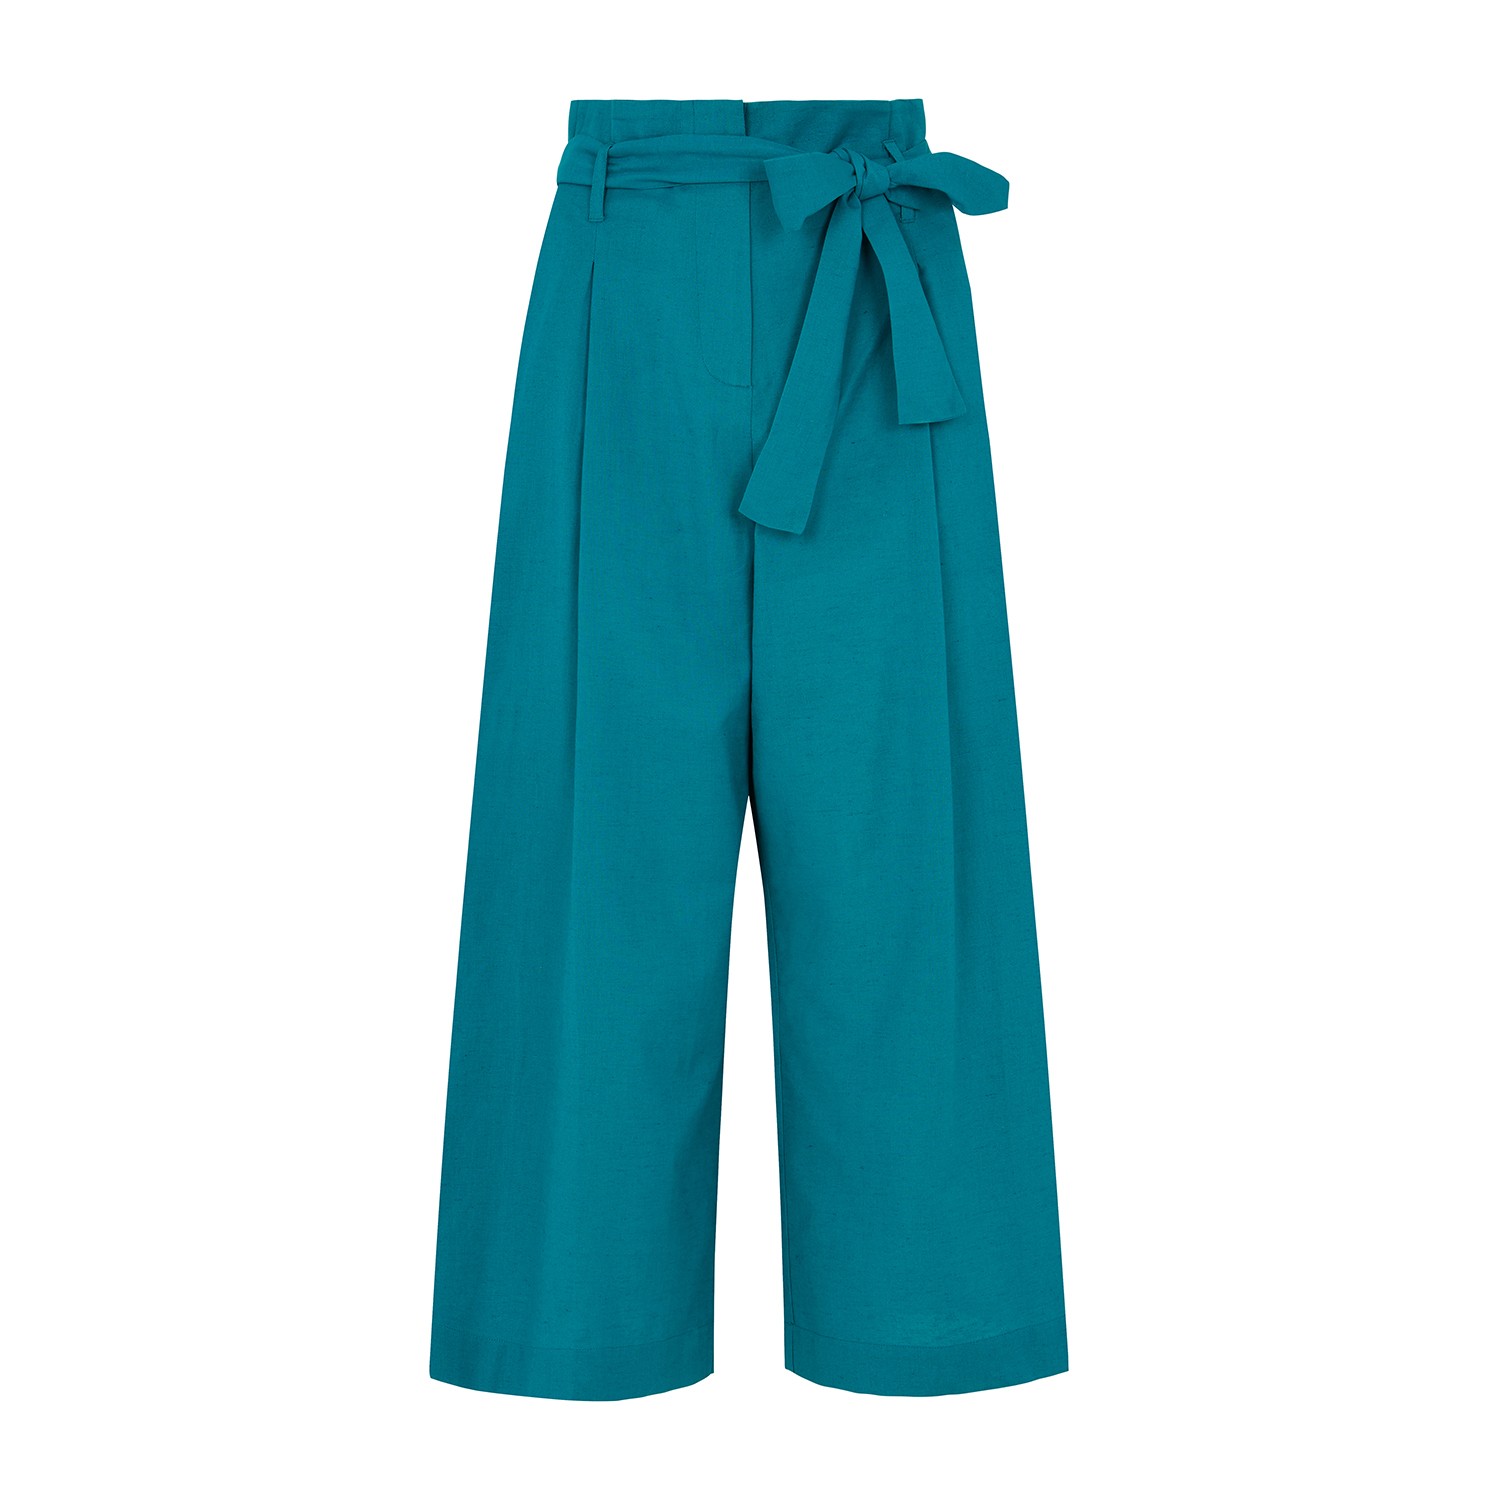 Emily And Fin Women's Green Gilda Cotton Linen Teal Trouser In Blue